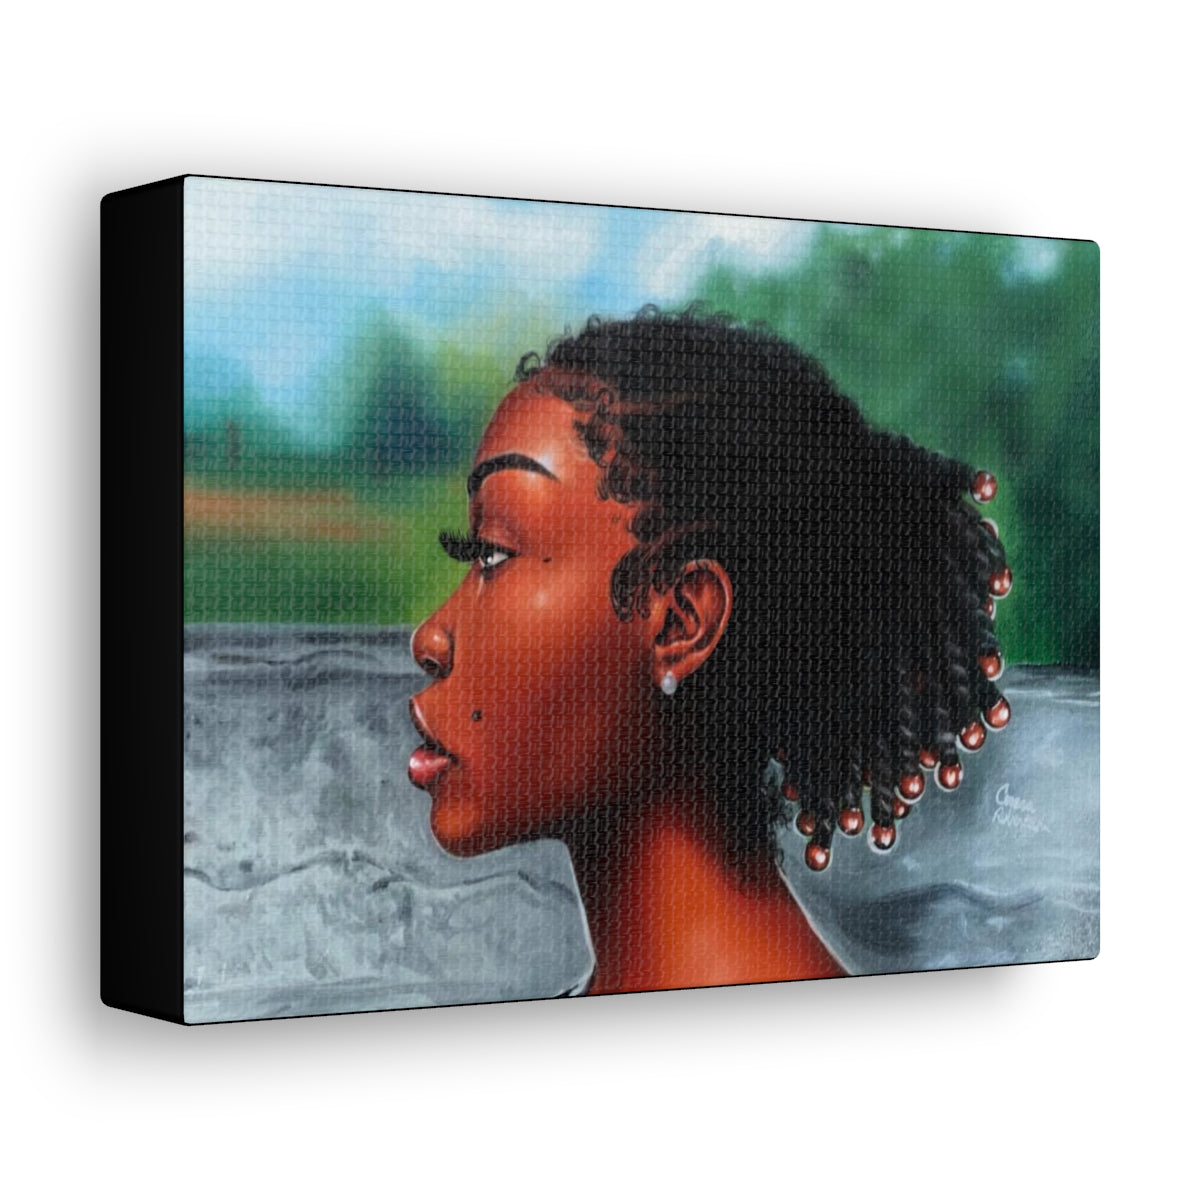 Jawn with the Pearl Earring (canvas print)